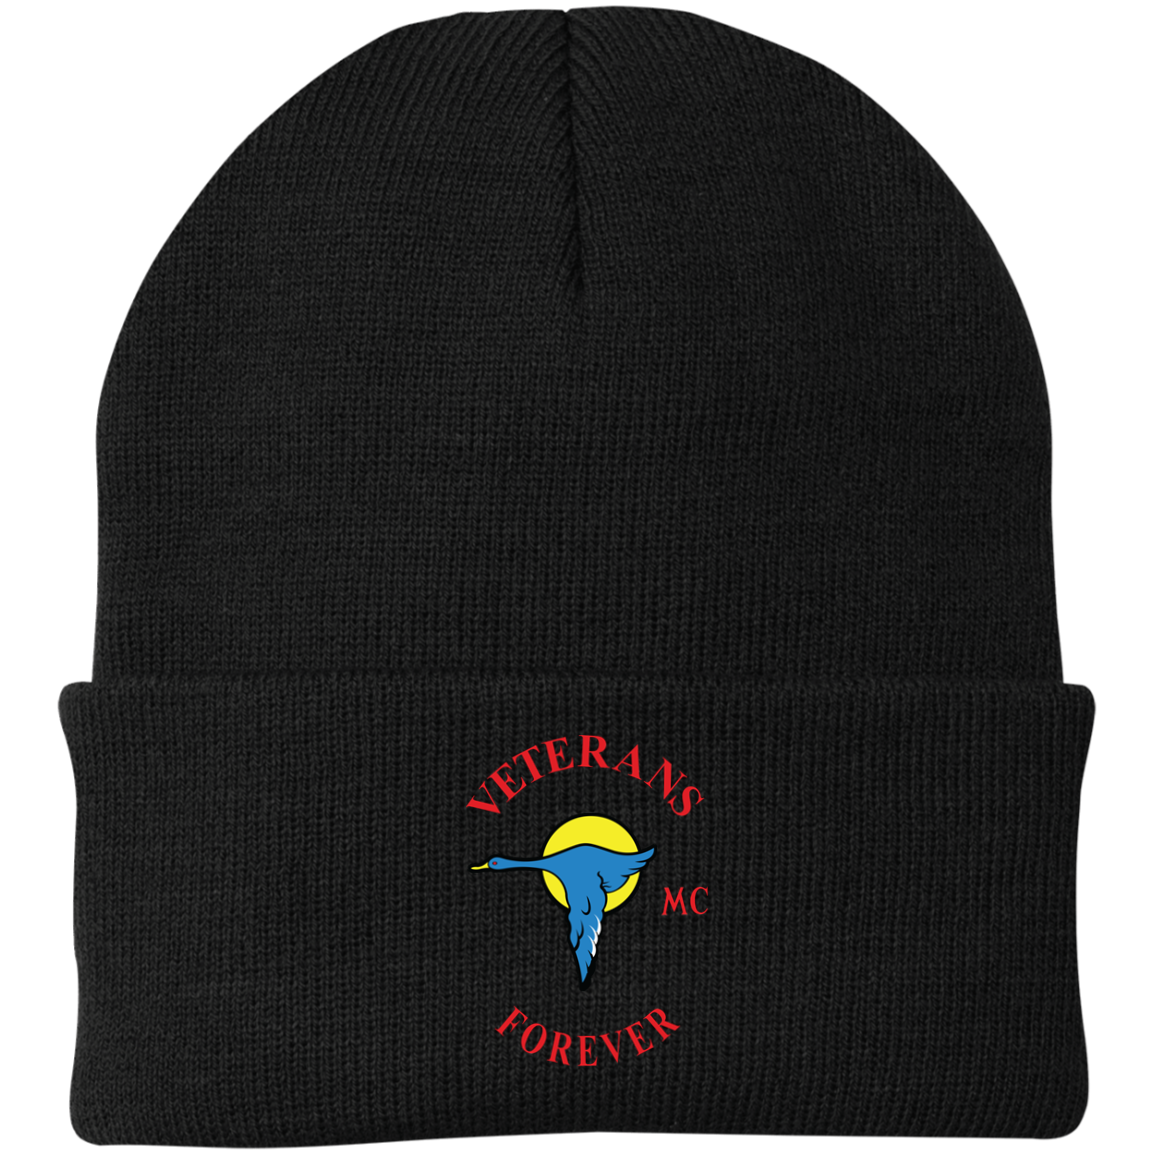 Veterans Forever goose logo with black 4500x5400 CP90 Knit Cap